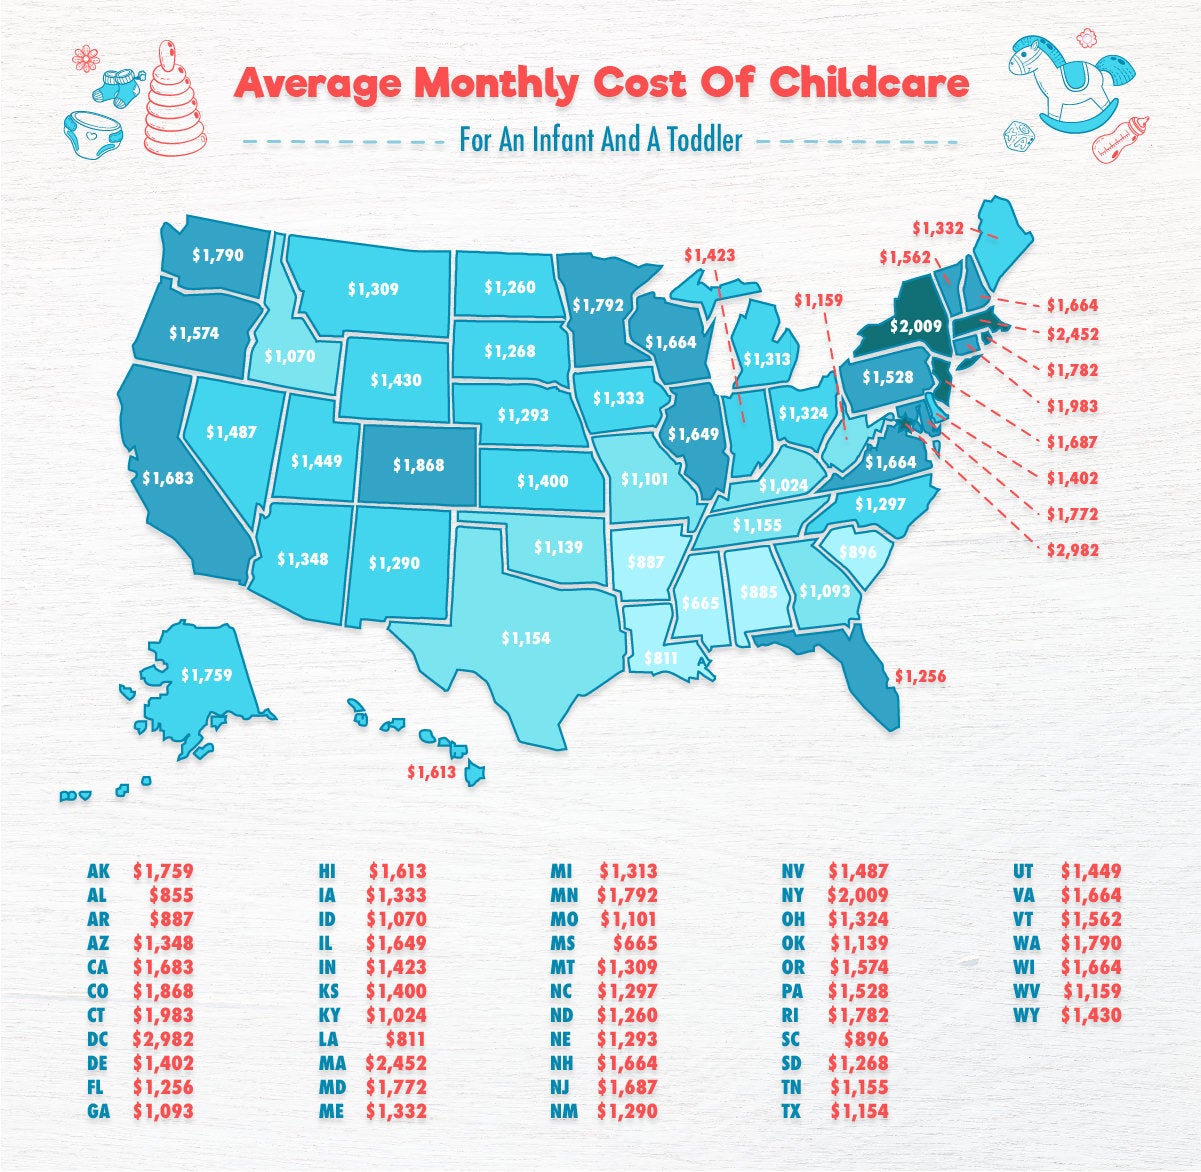 Average monthly cost of childcare